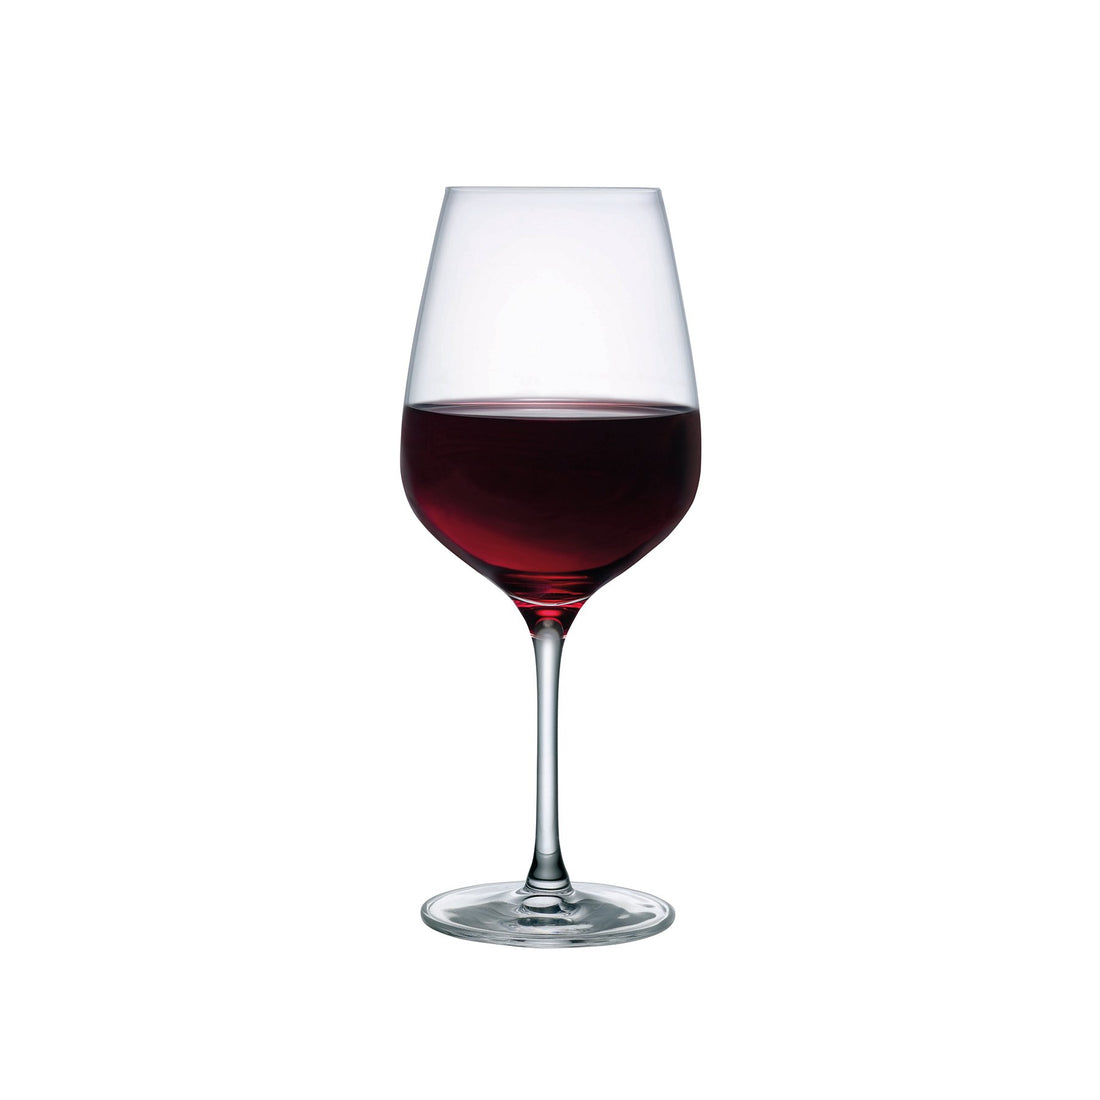 NUDE Refine wine glass in leadfree crystal with red wine